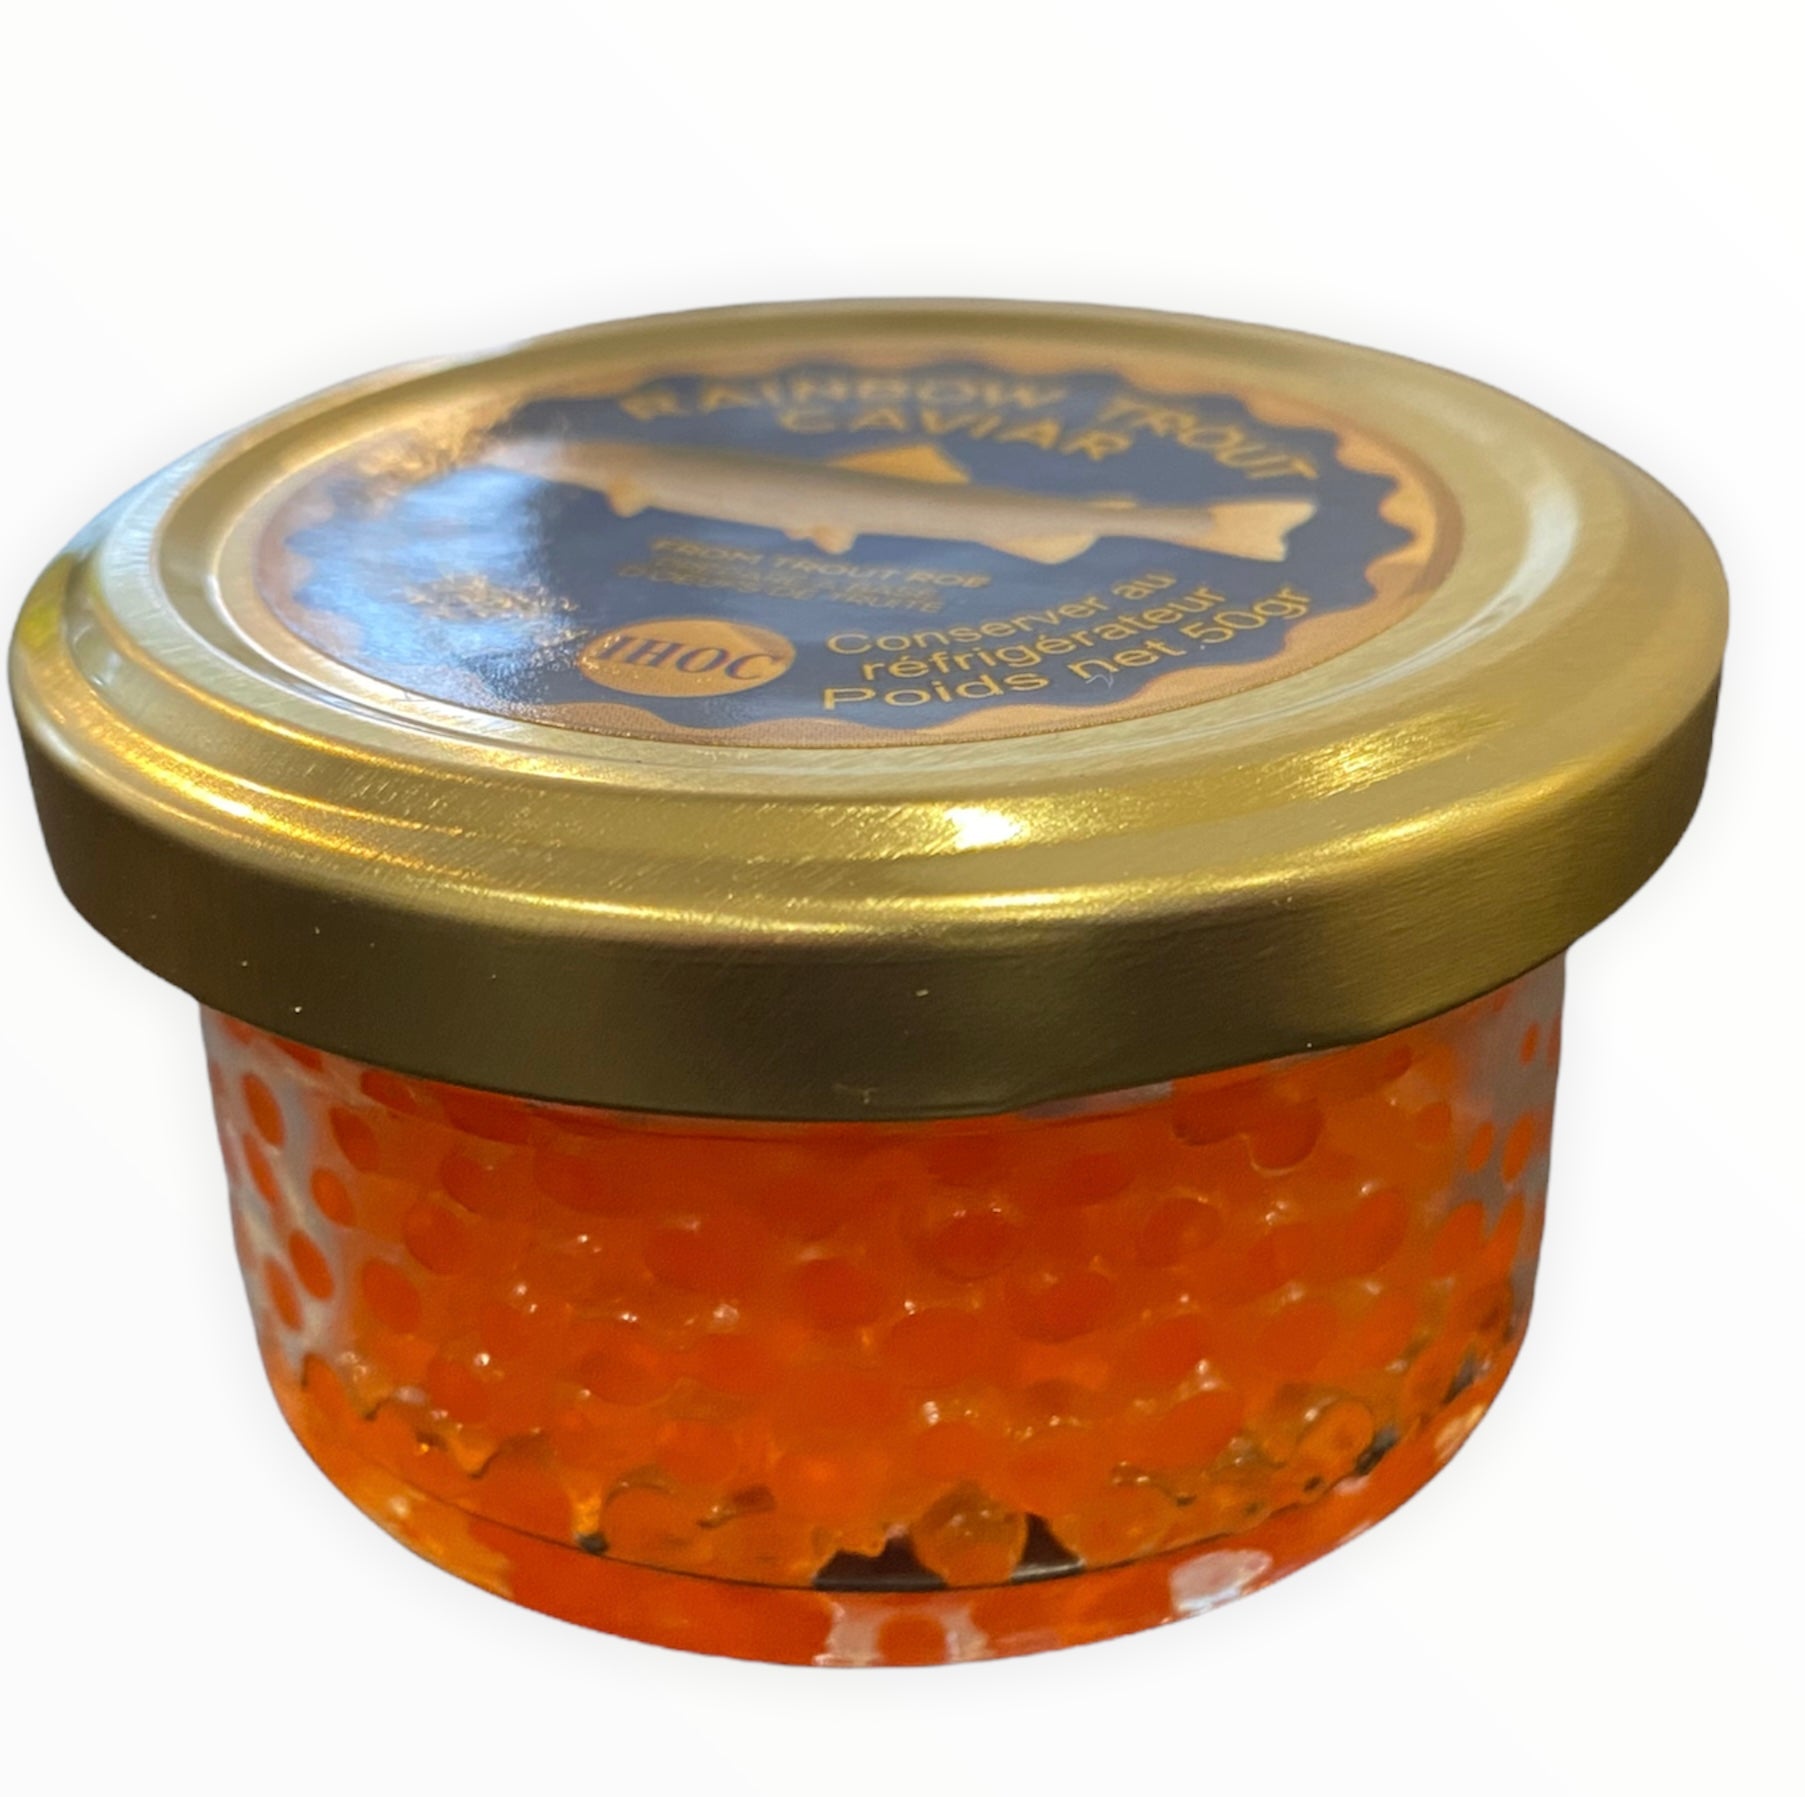 Trout roe – Oysters & Caviar